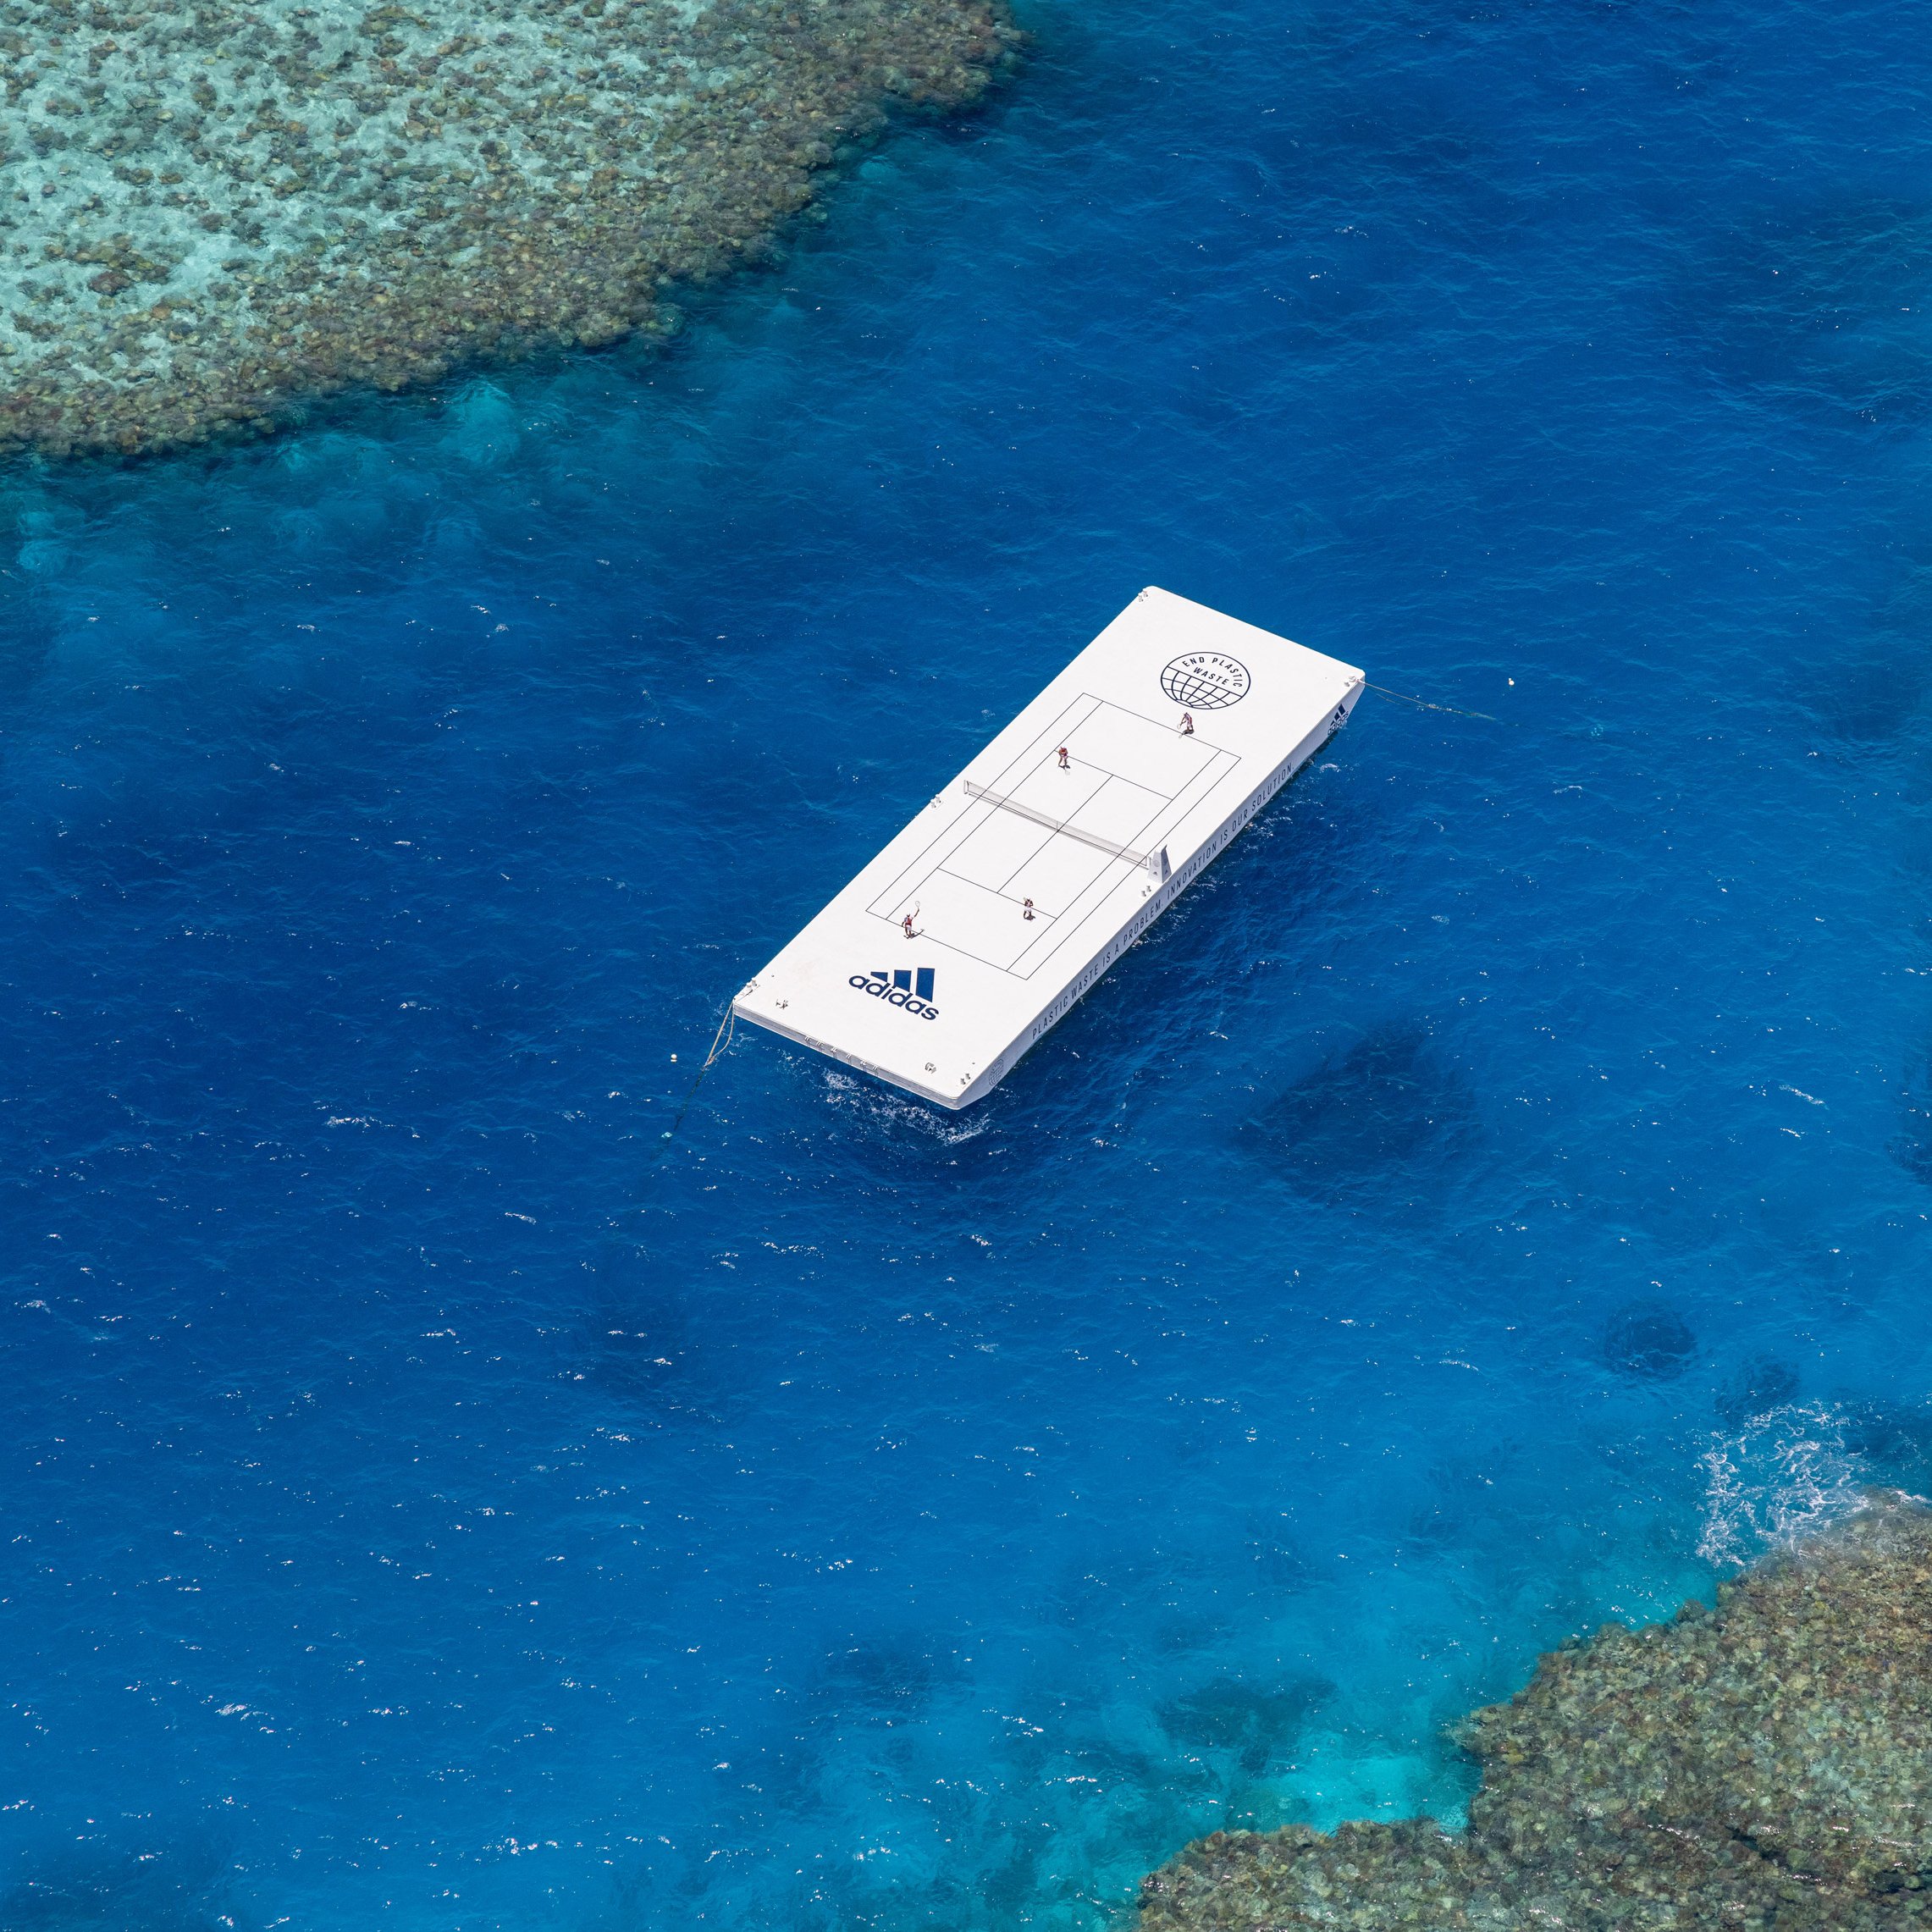 Adidas launches court in Great Barrier Reef